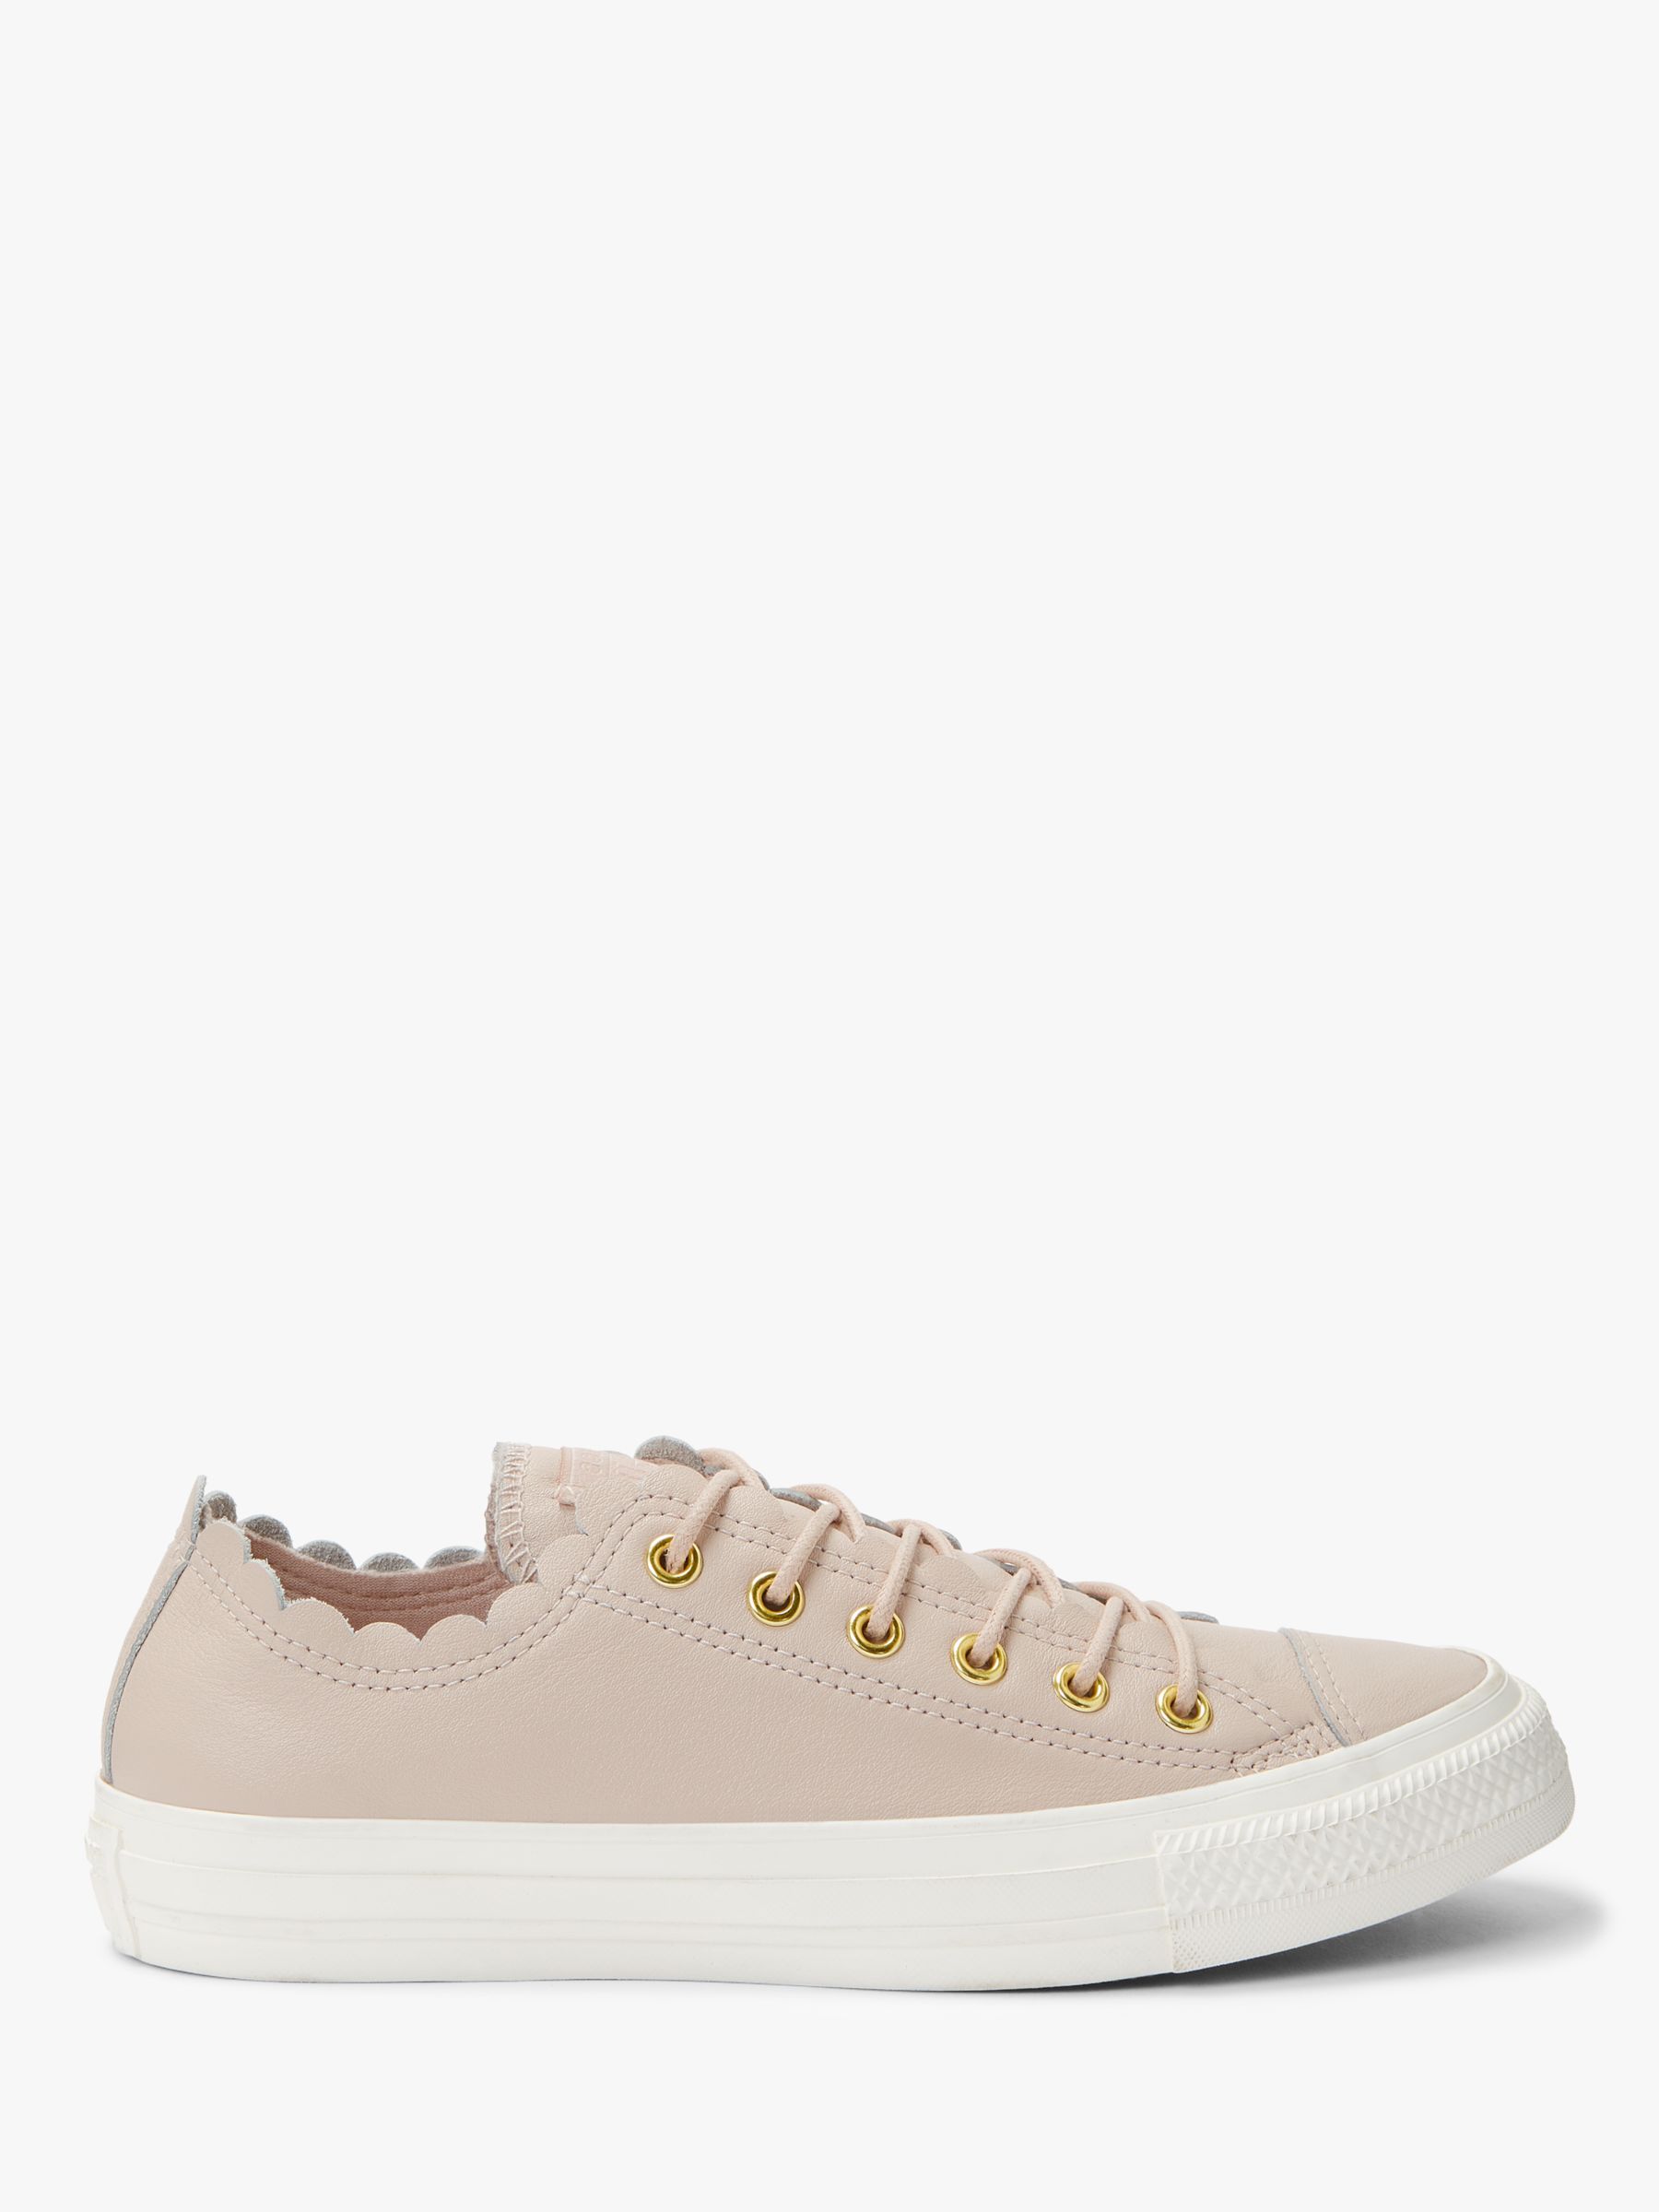 converse leather trainers ladies